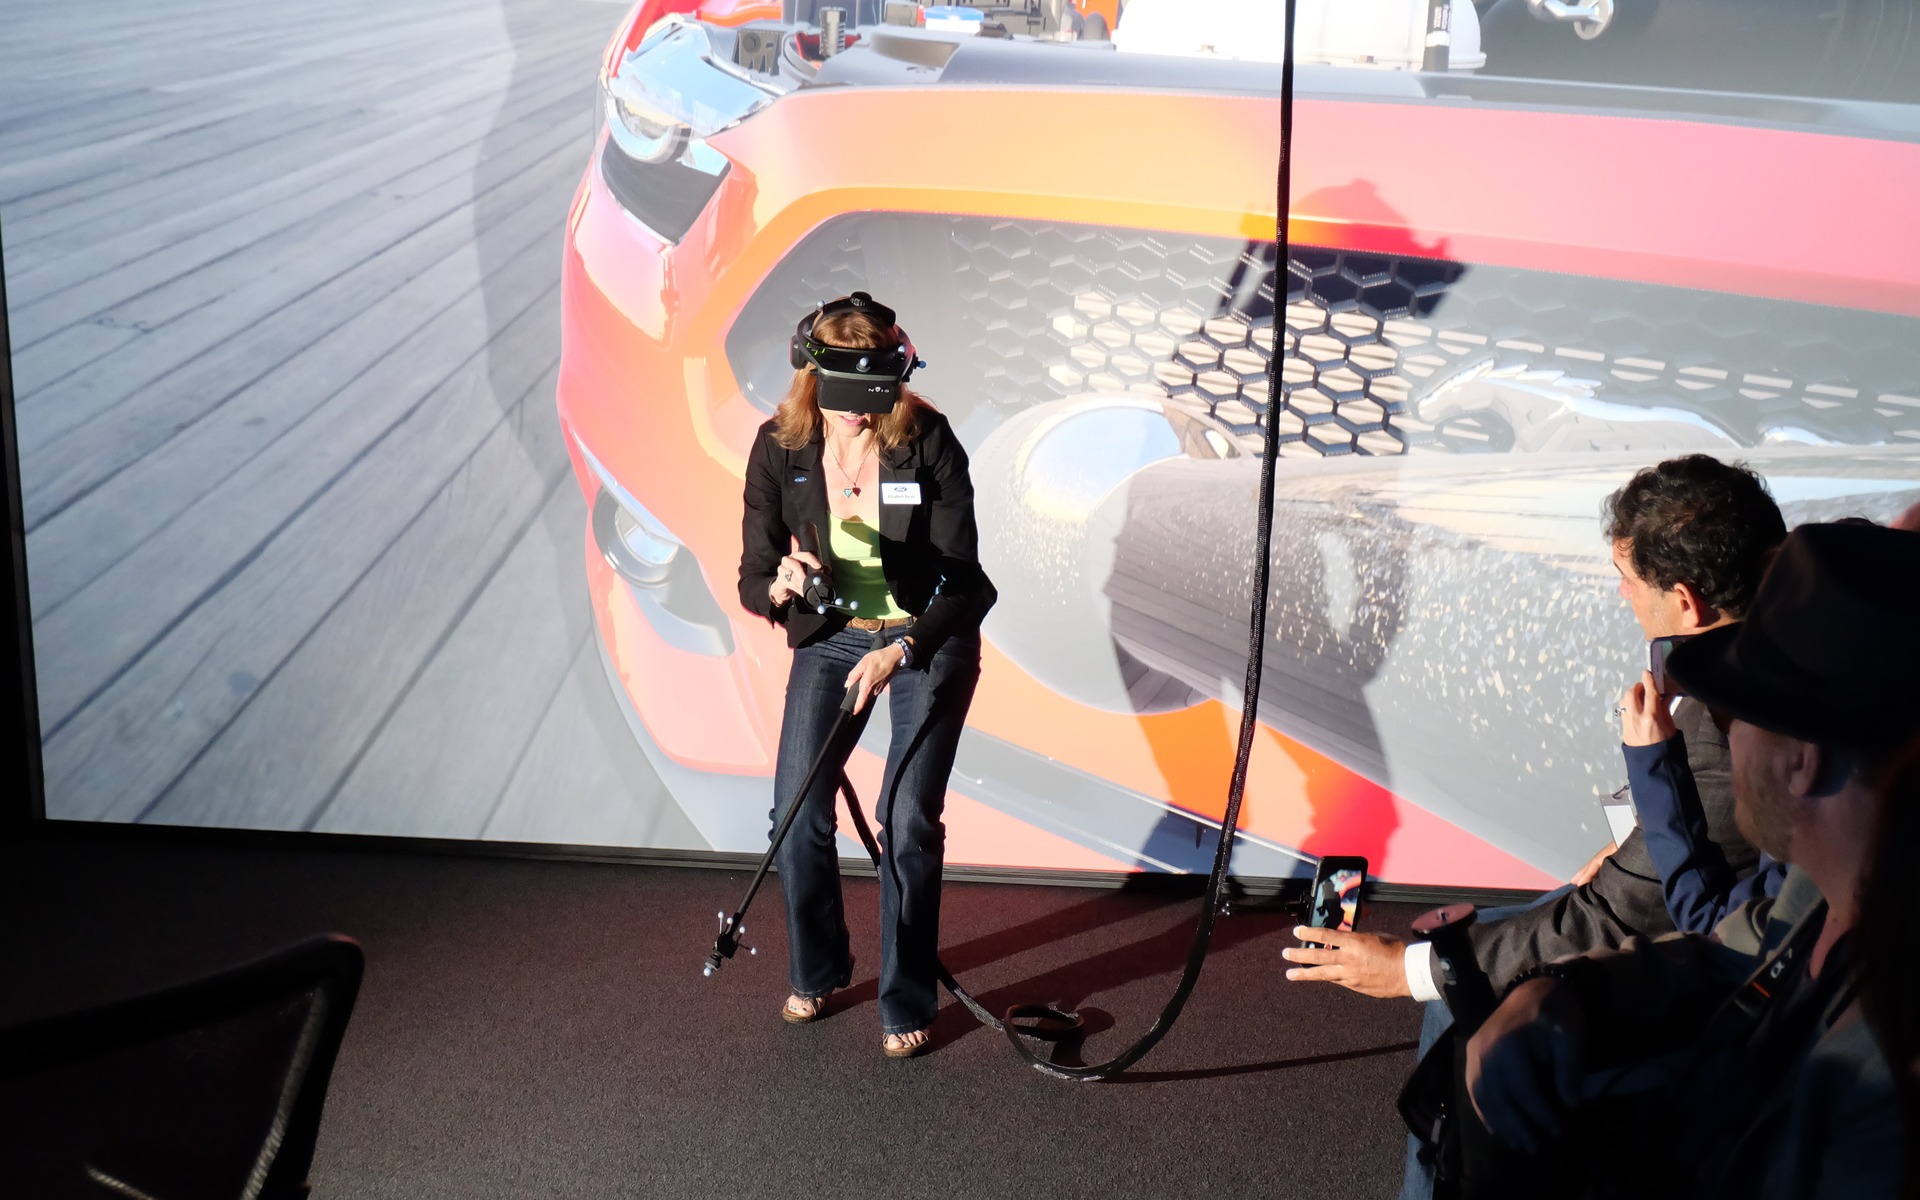 Virtual reality looks much better from INSIDE the helmet